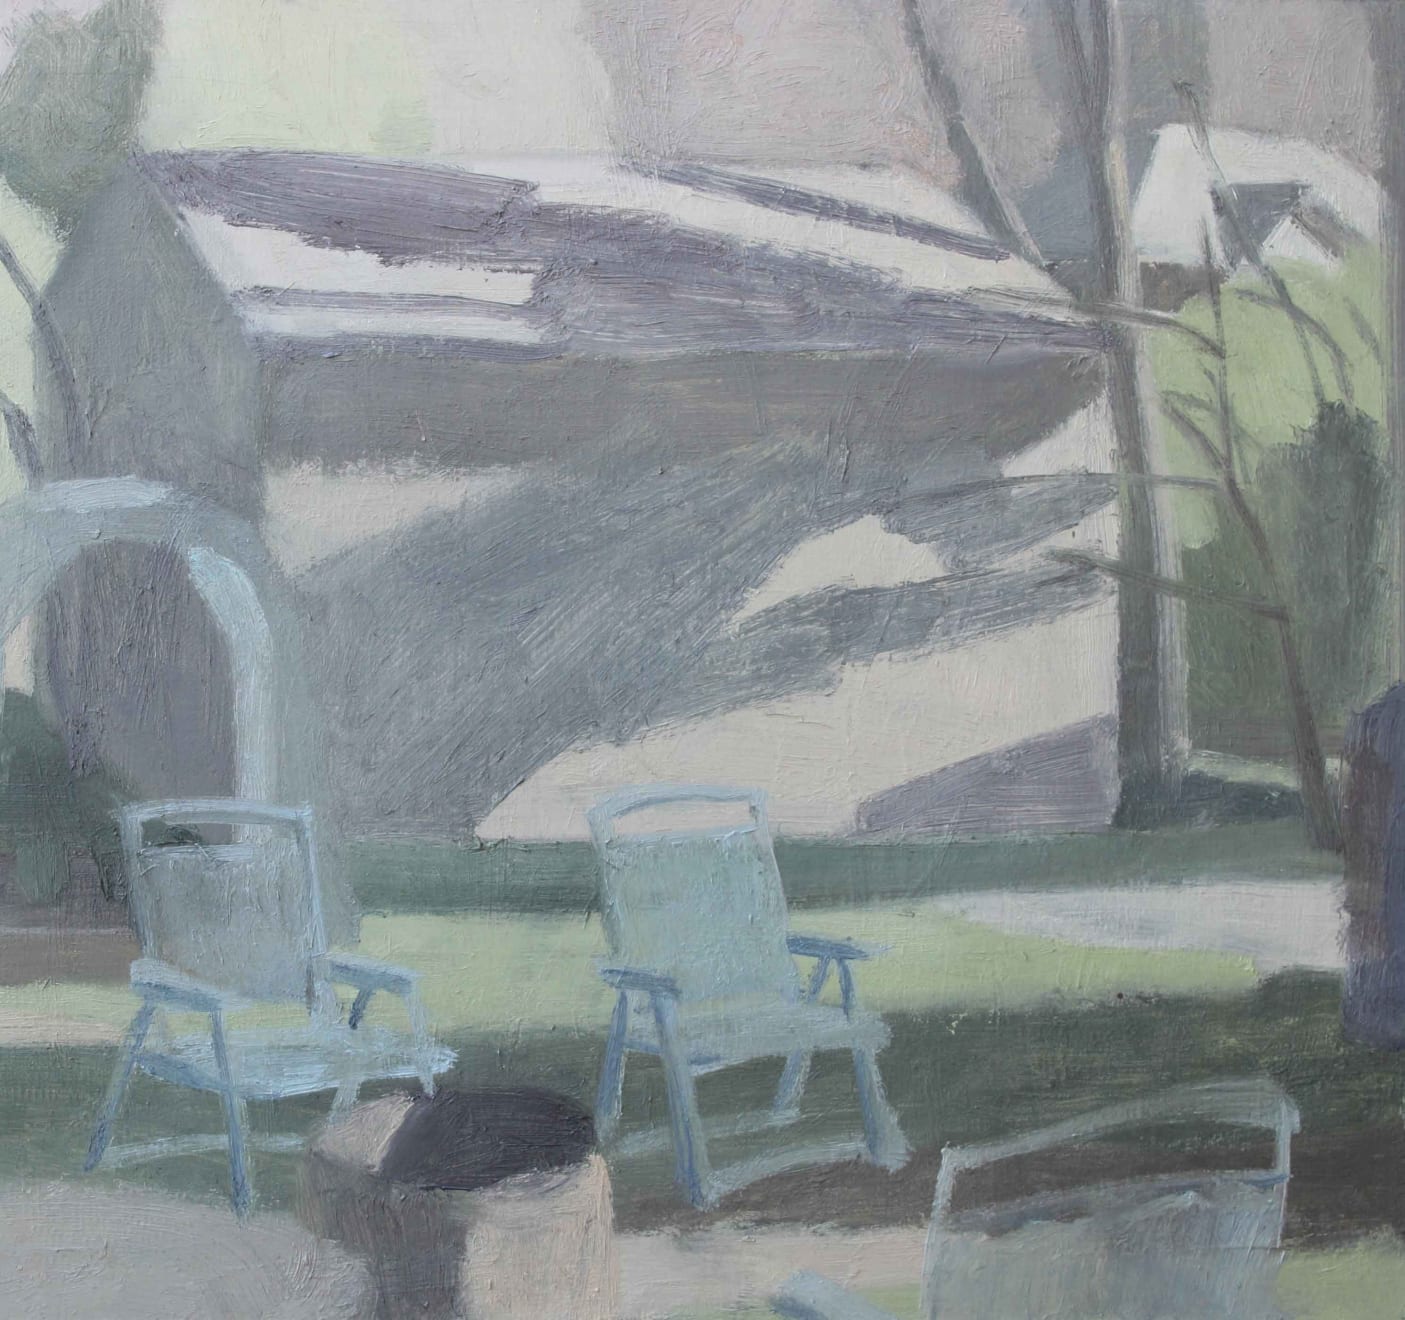 LAURA VAHLBERG BLUE CHAIRS Oil on Linen Board 28 x 30cm $2300